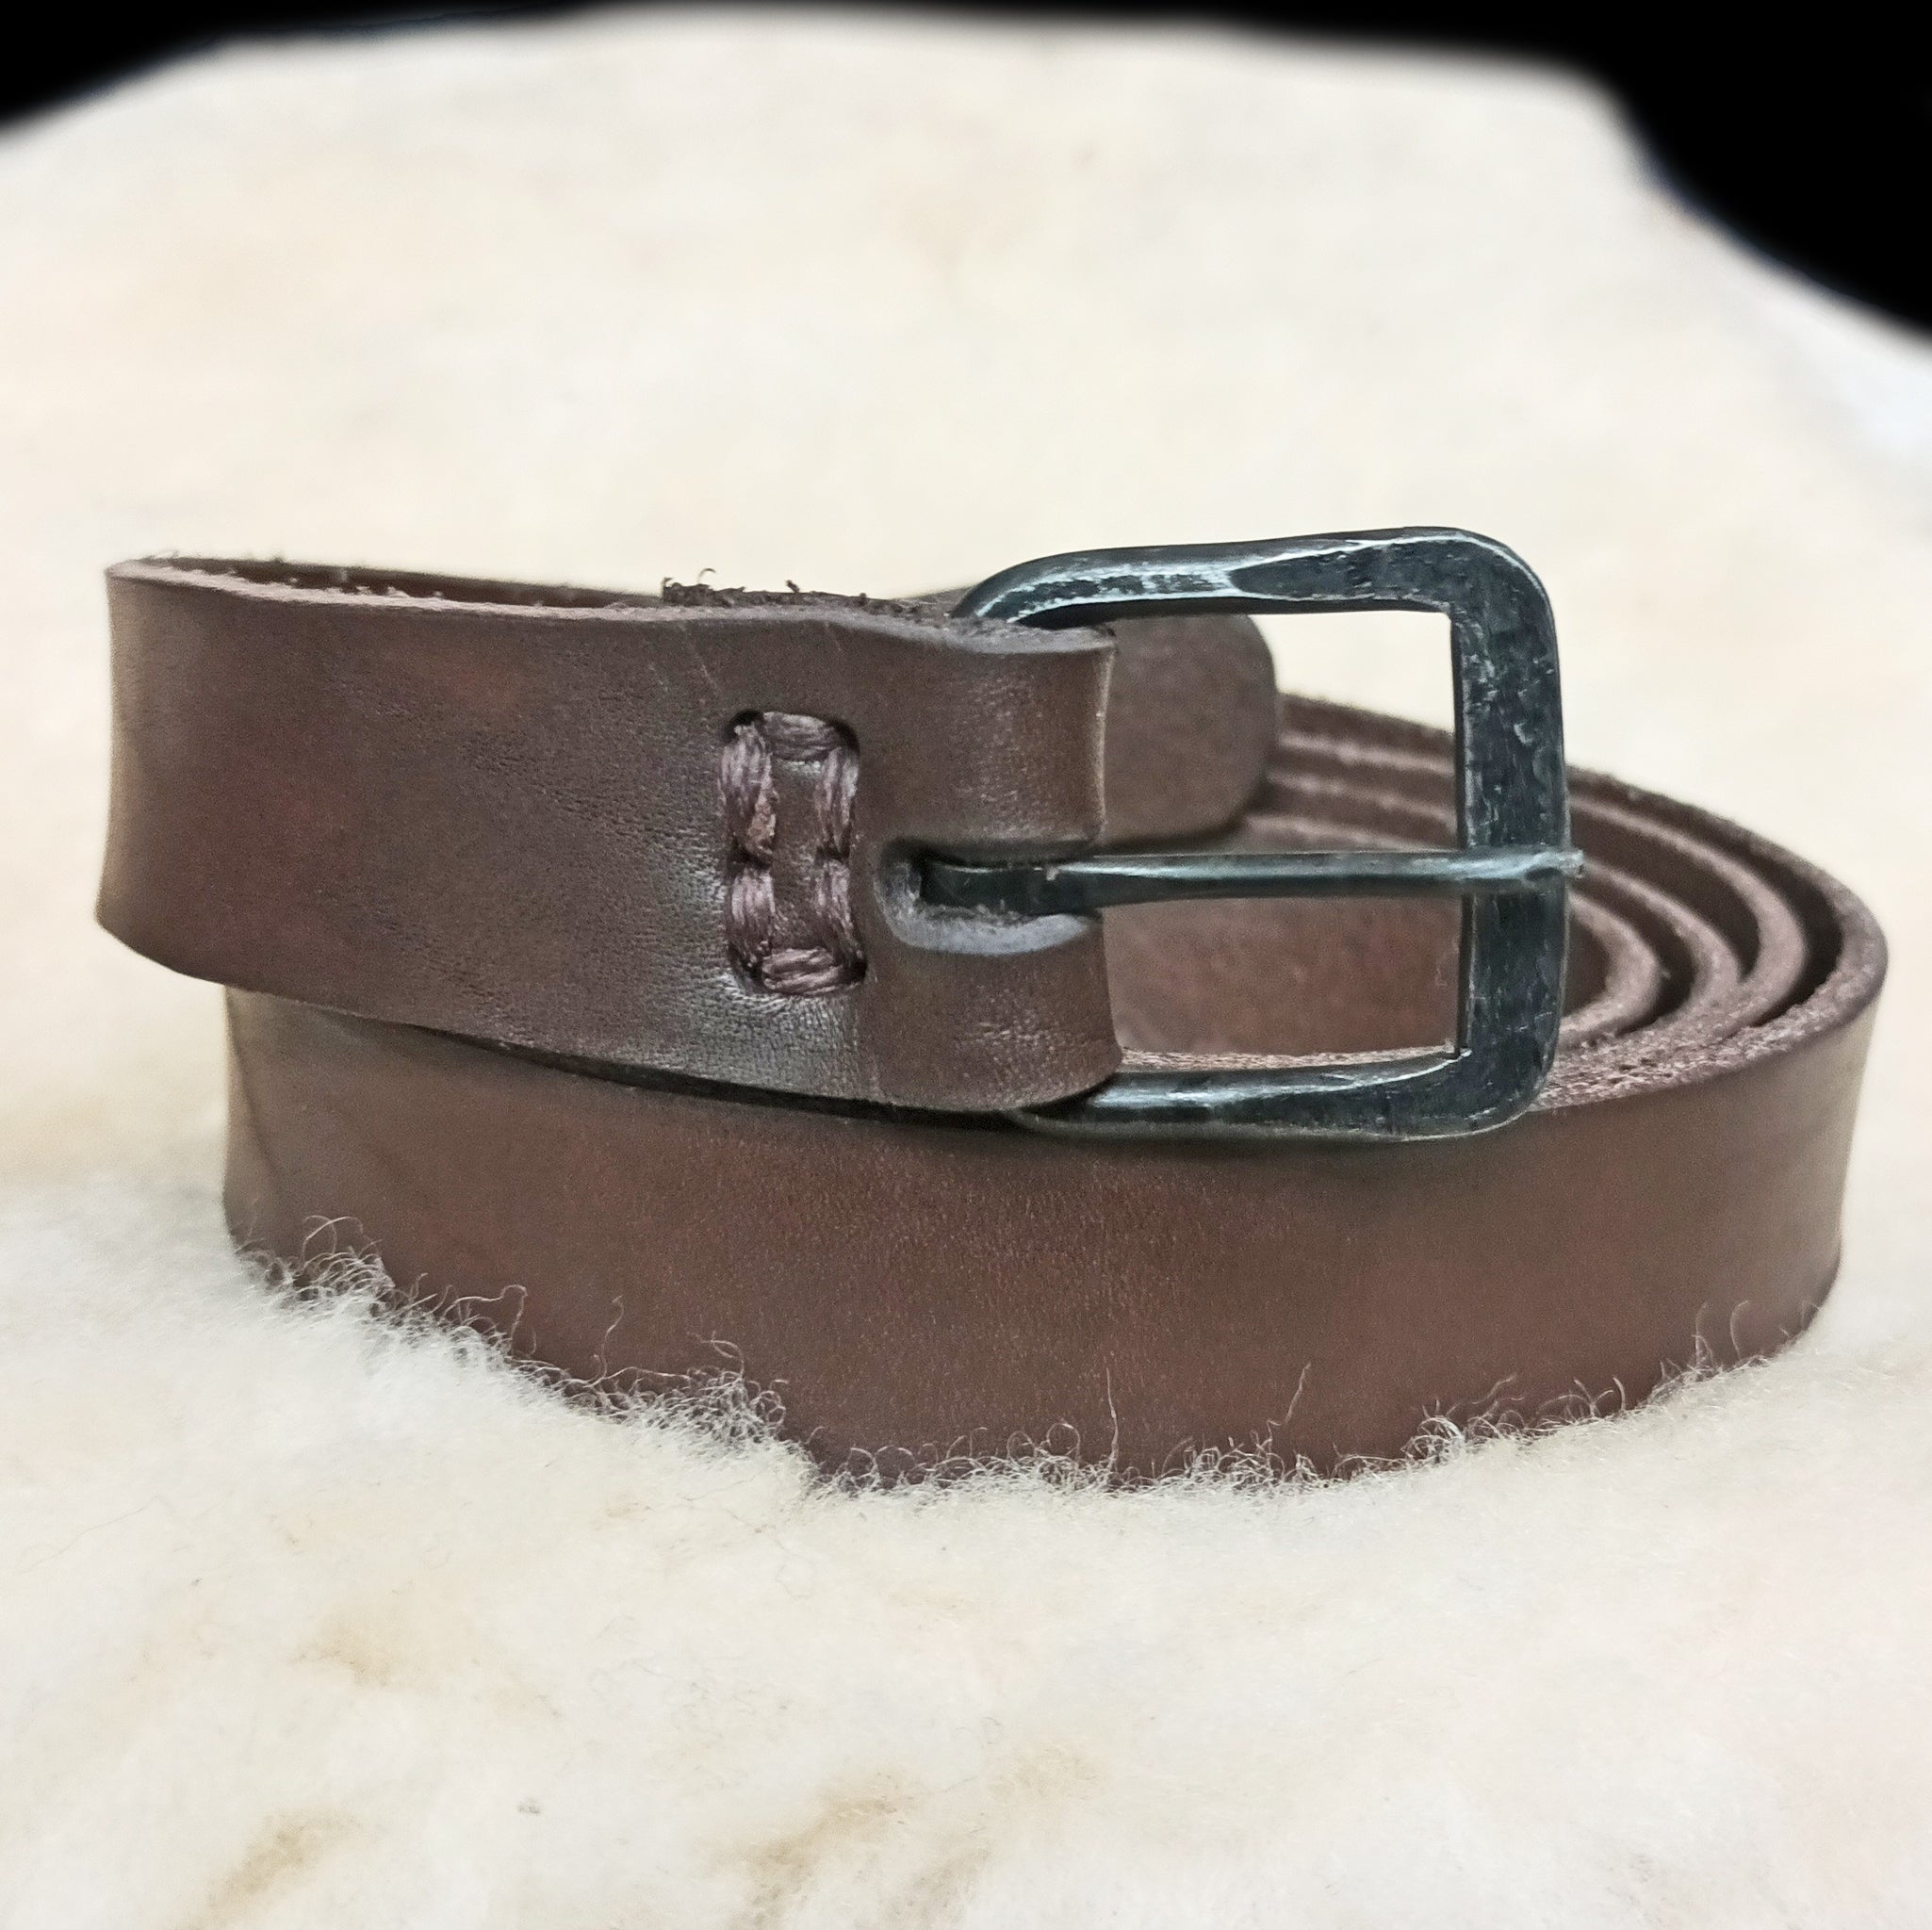 Dragon Belt Loop with Ring to hold your medieval accessories